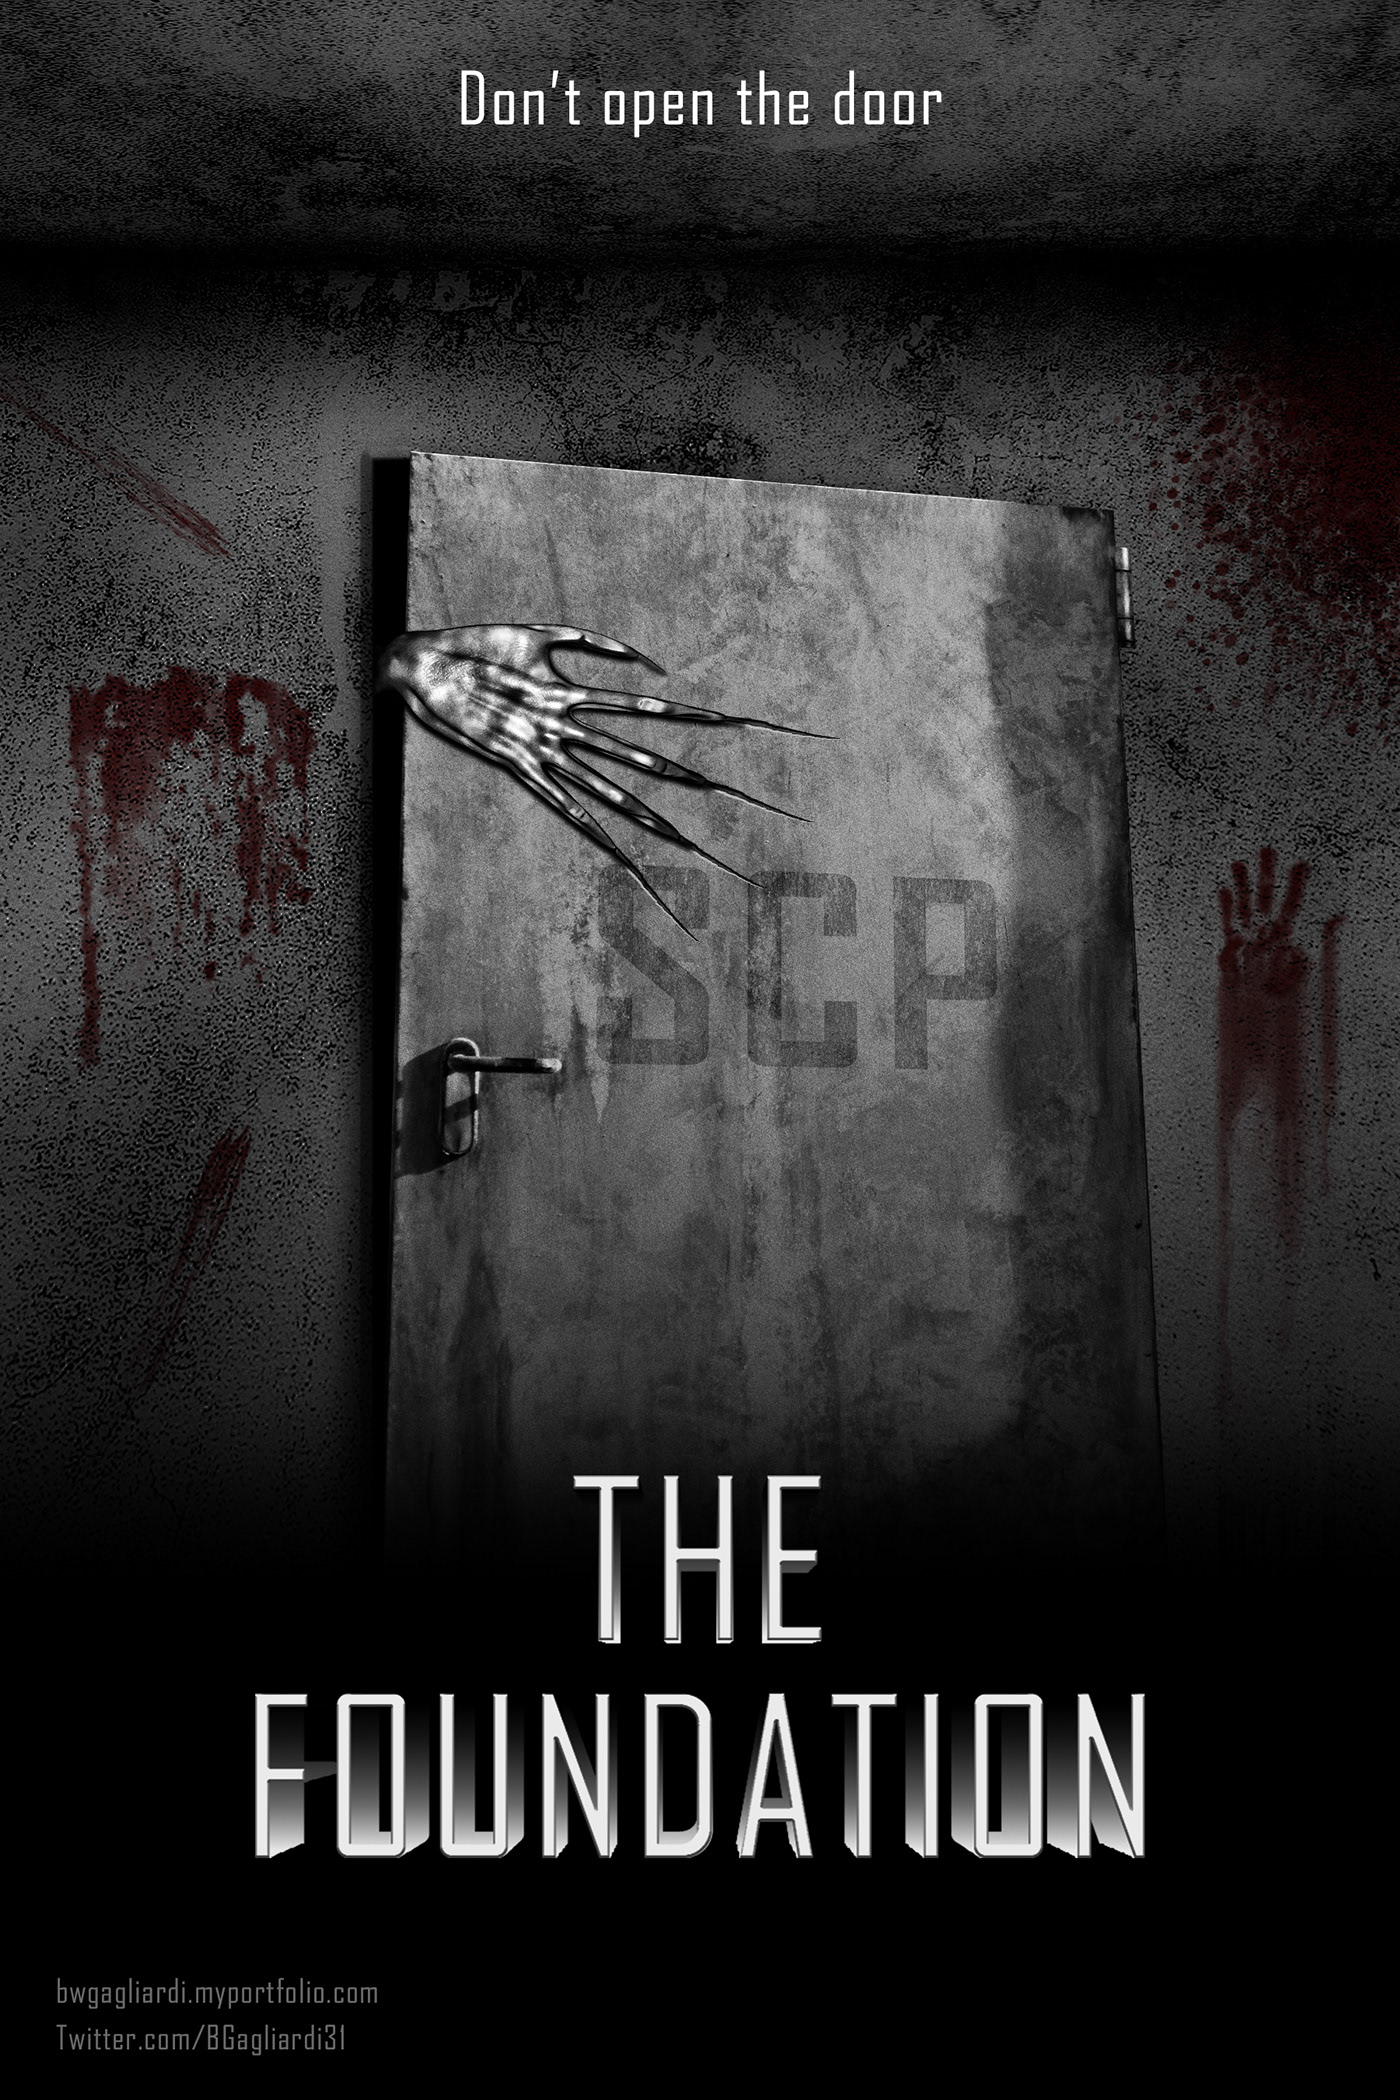 THE FOUNDATION - A SCP Inspired Mock Movie Poster on Behance